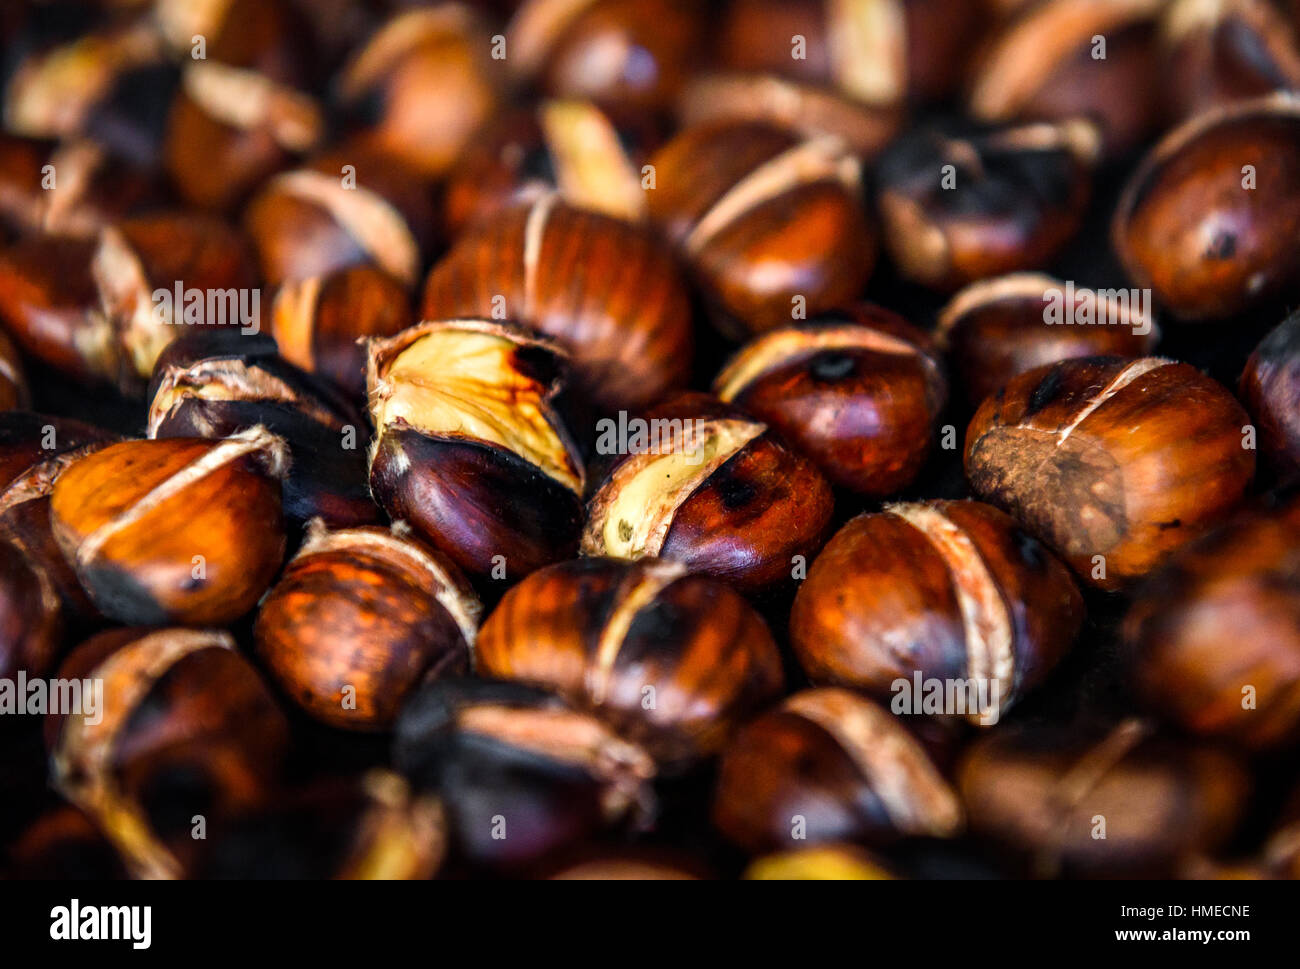 Roasting grilled Chestnuts on barbecue with flames, fire and charcoal. Homemade roasted chestnuts are prepared in BBQ grill fireplace. Stock Photo